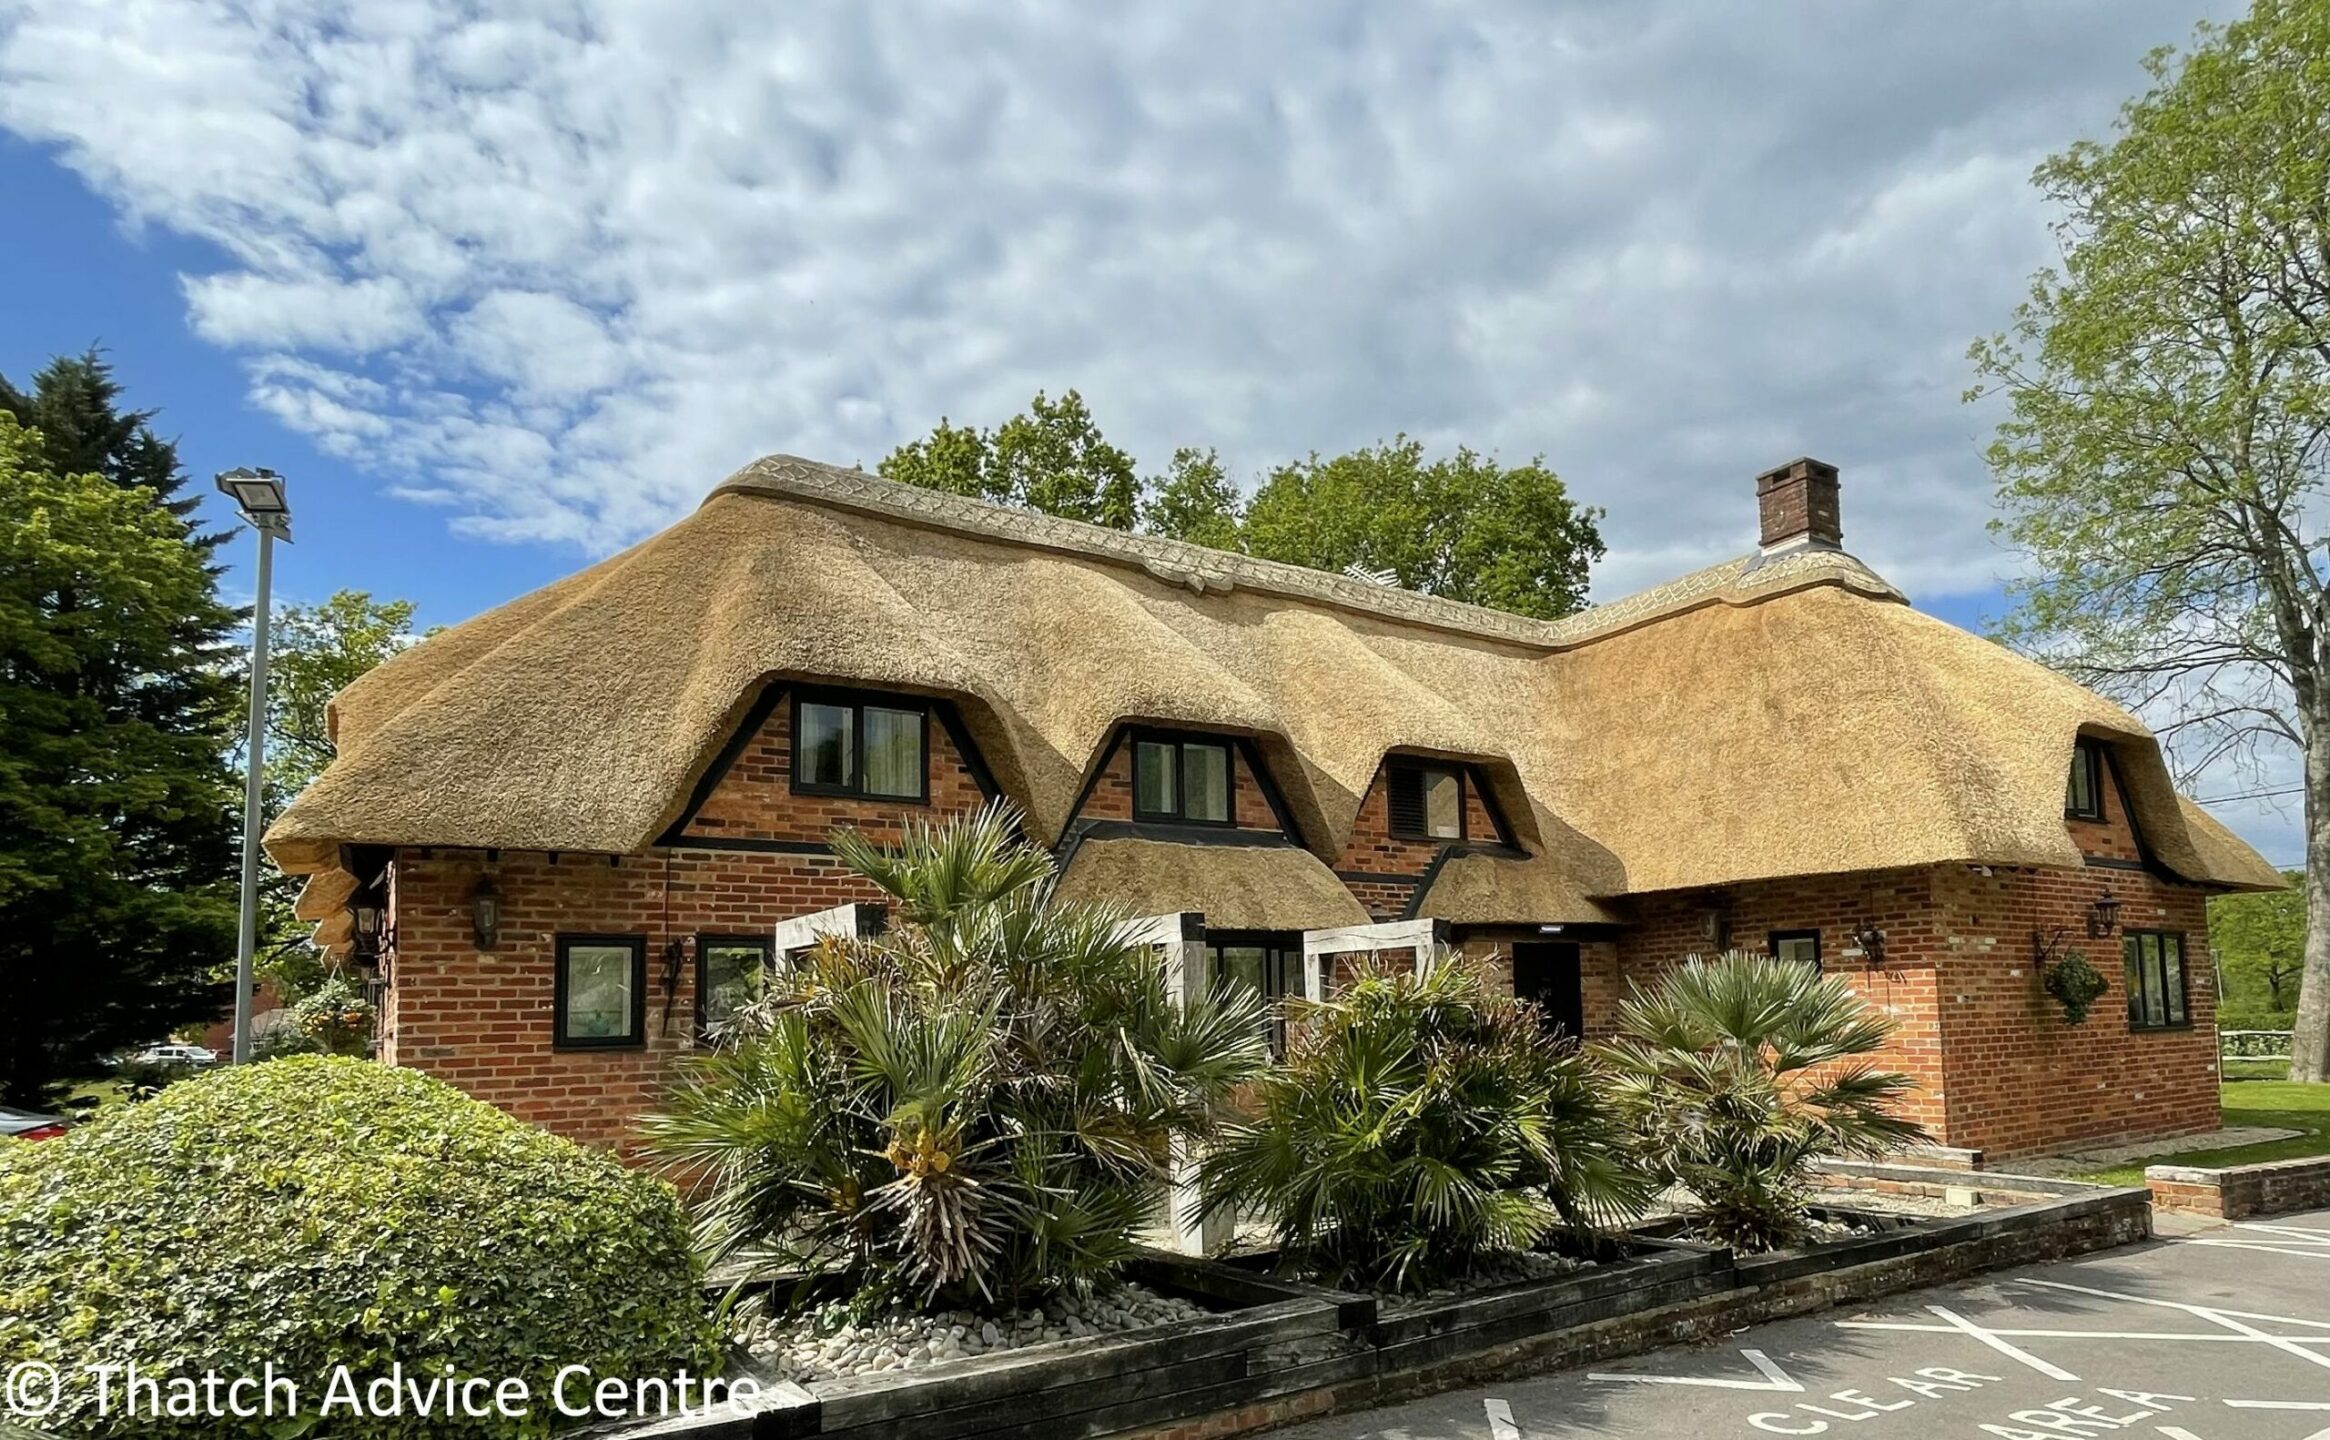 Thatch Advice Centre Thatched Business Picture Competiton - Pilgrim Inn